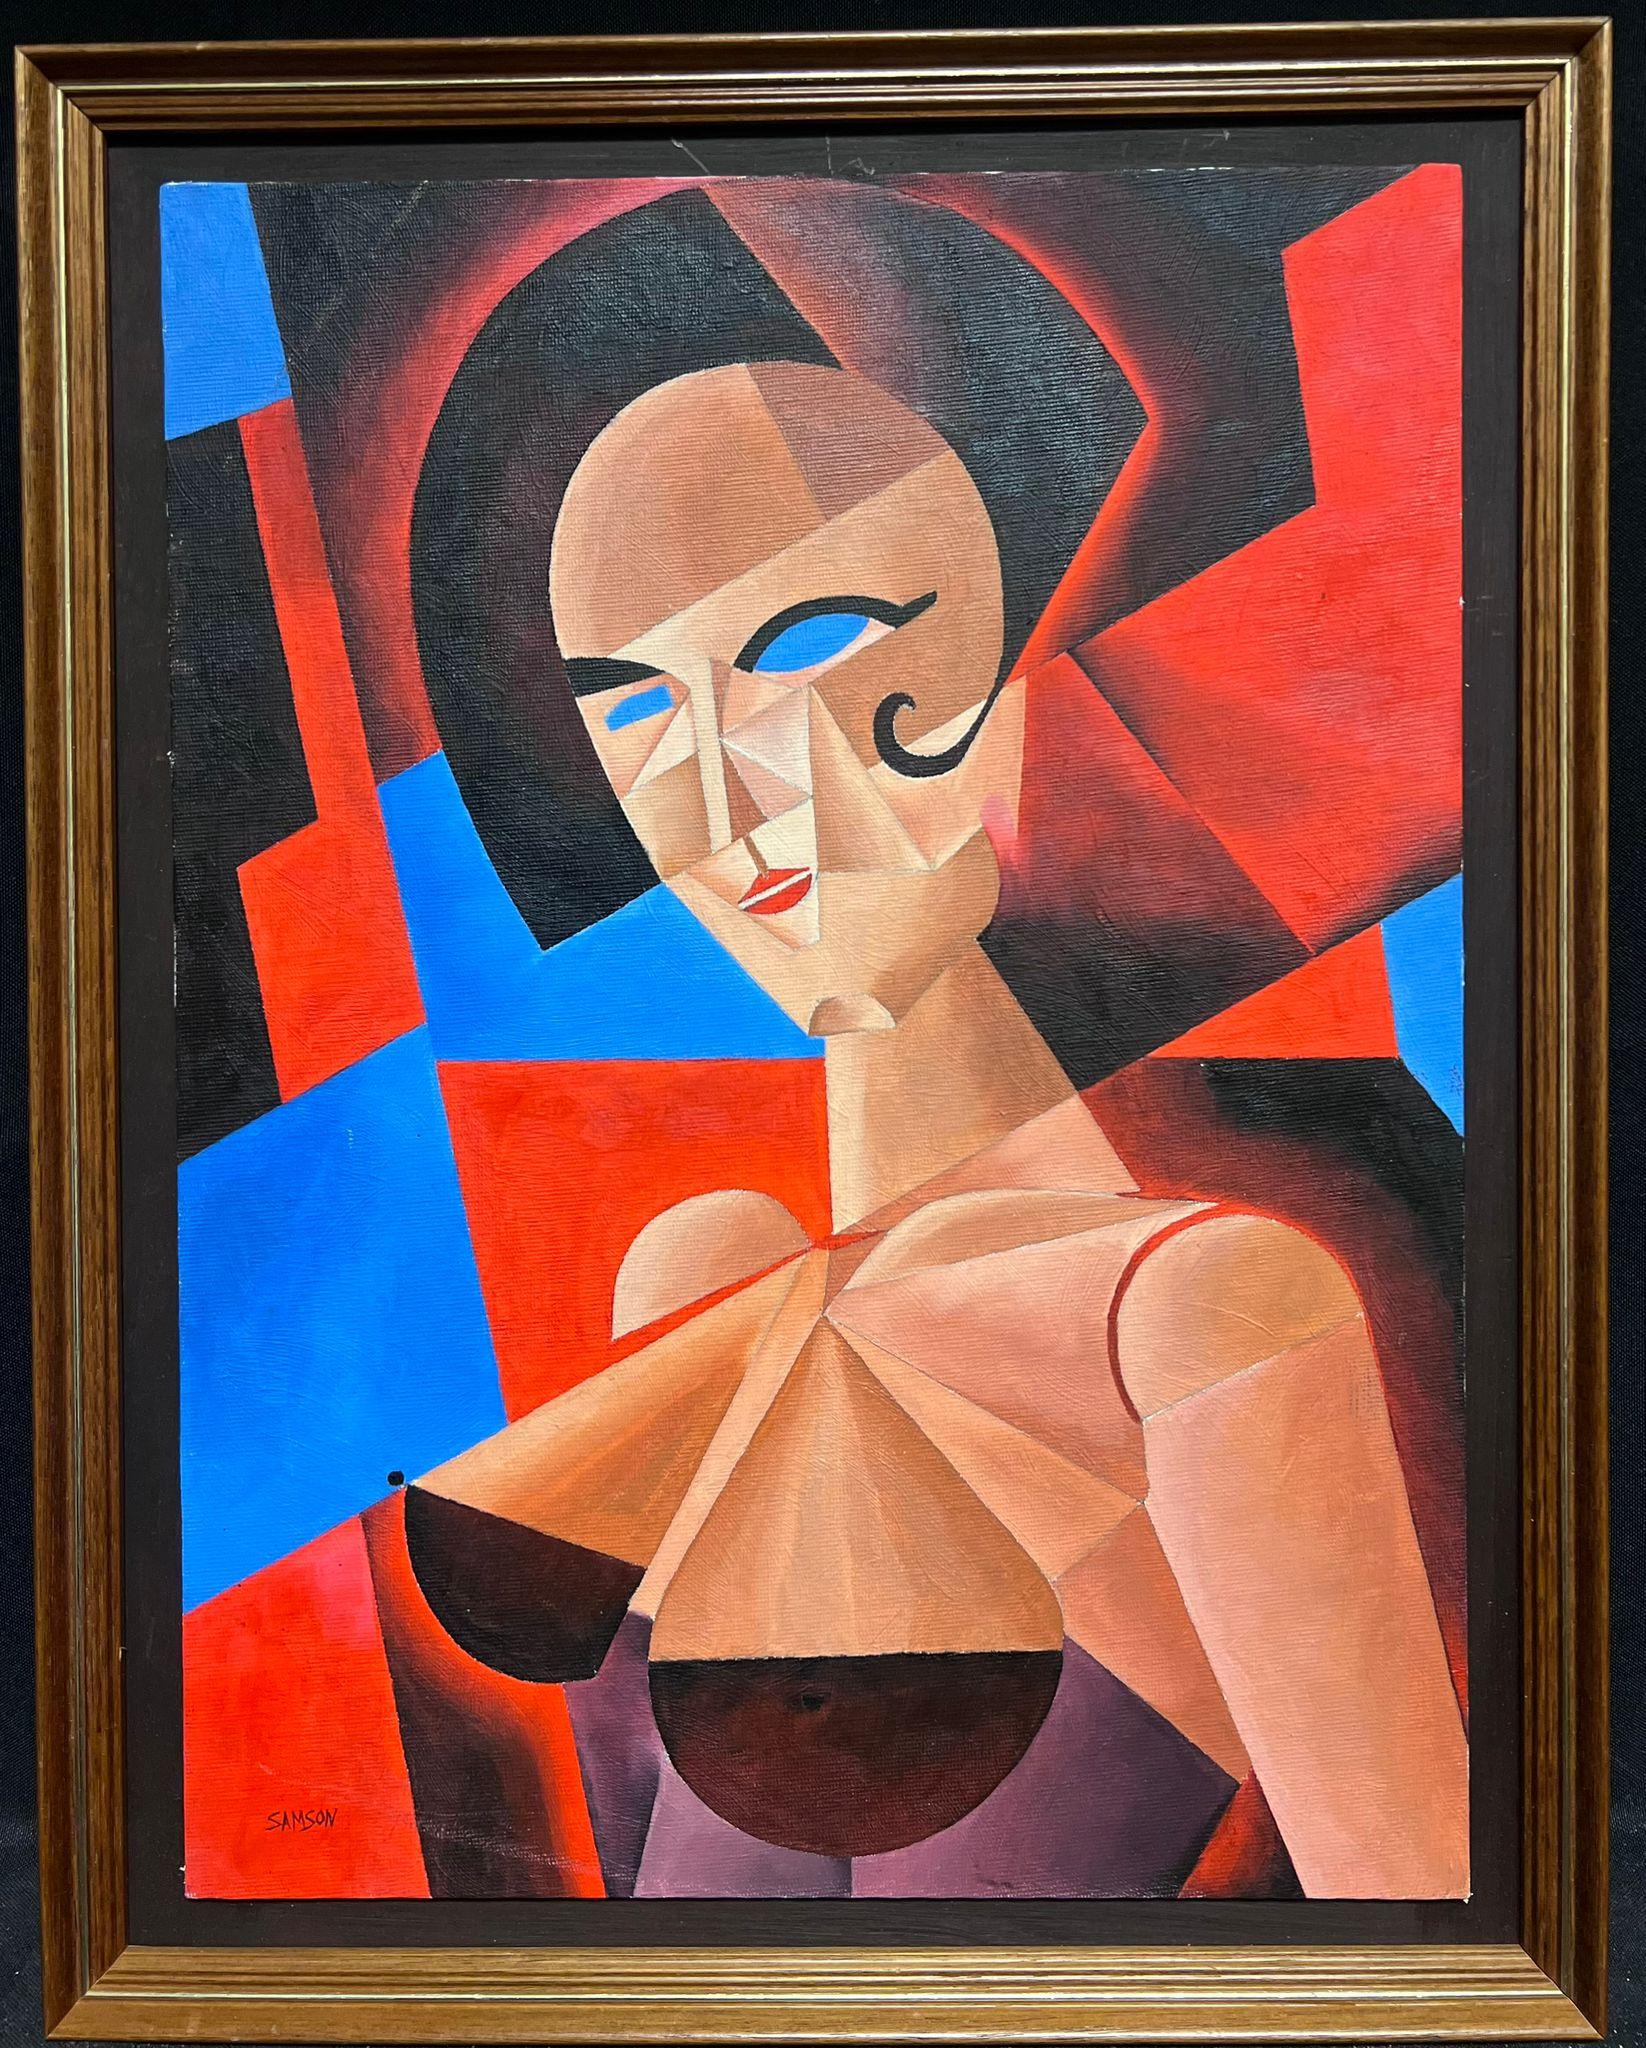 Cubist Portrait of a Woman
signed, 'Samson'
British, 20th century
oil painting on board, framed
frame: 18.5 x 14.5 inches
board: 16 x 12 inches
provenance: private collection, UK
condition: very good and sound condition 